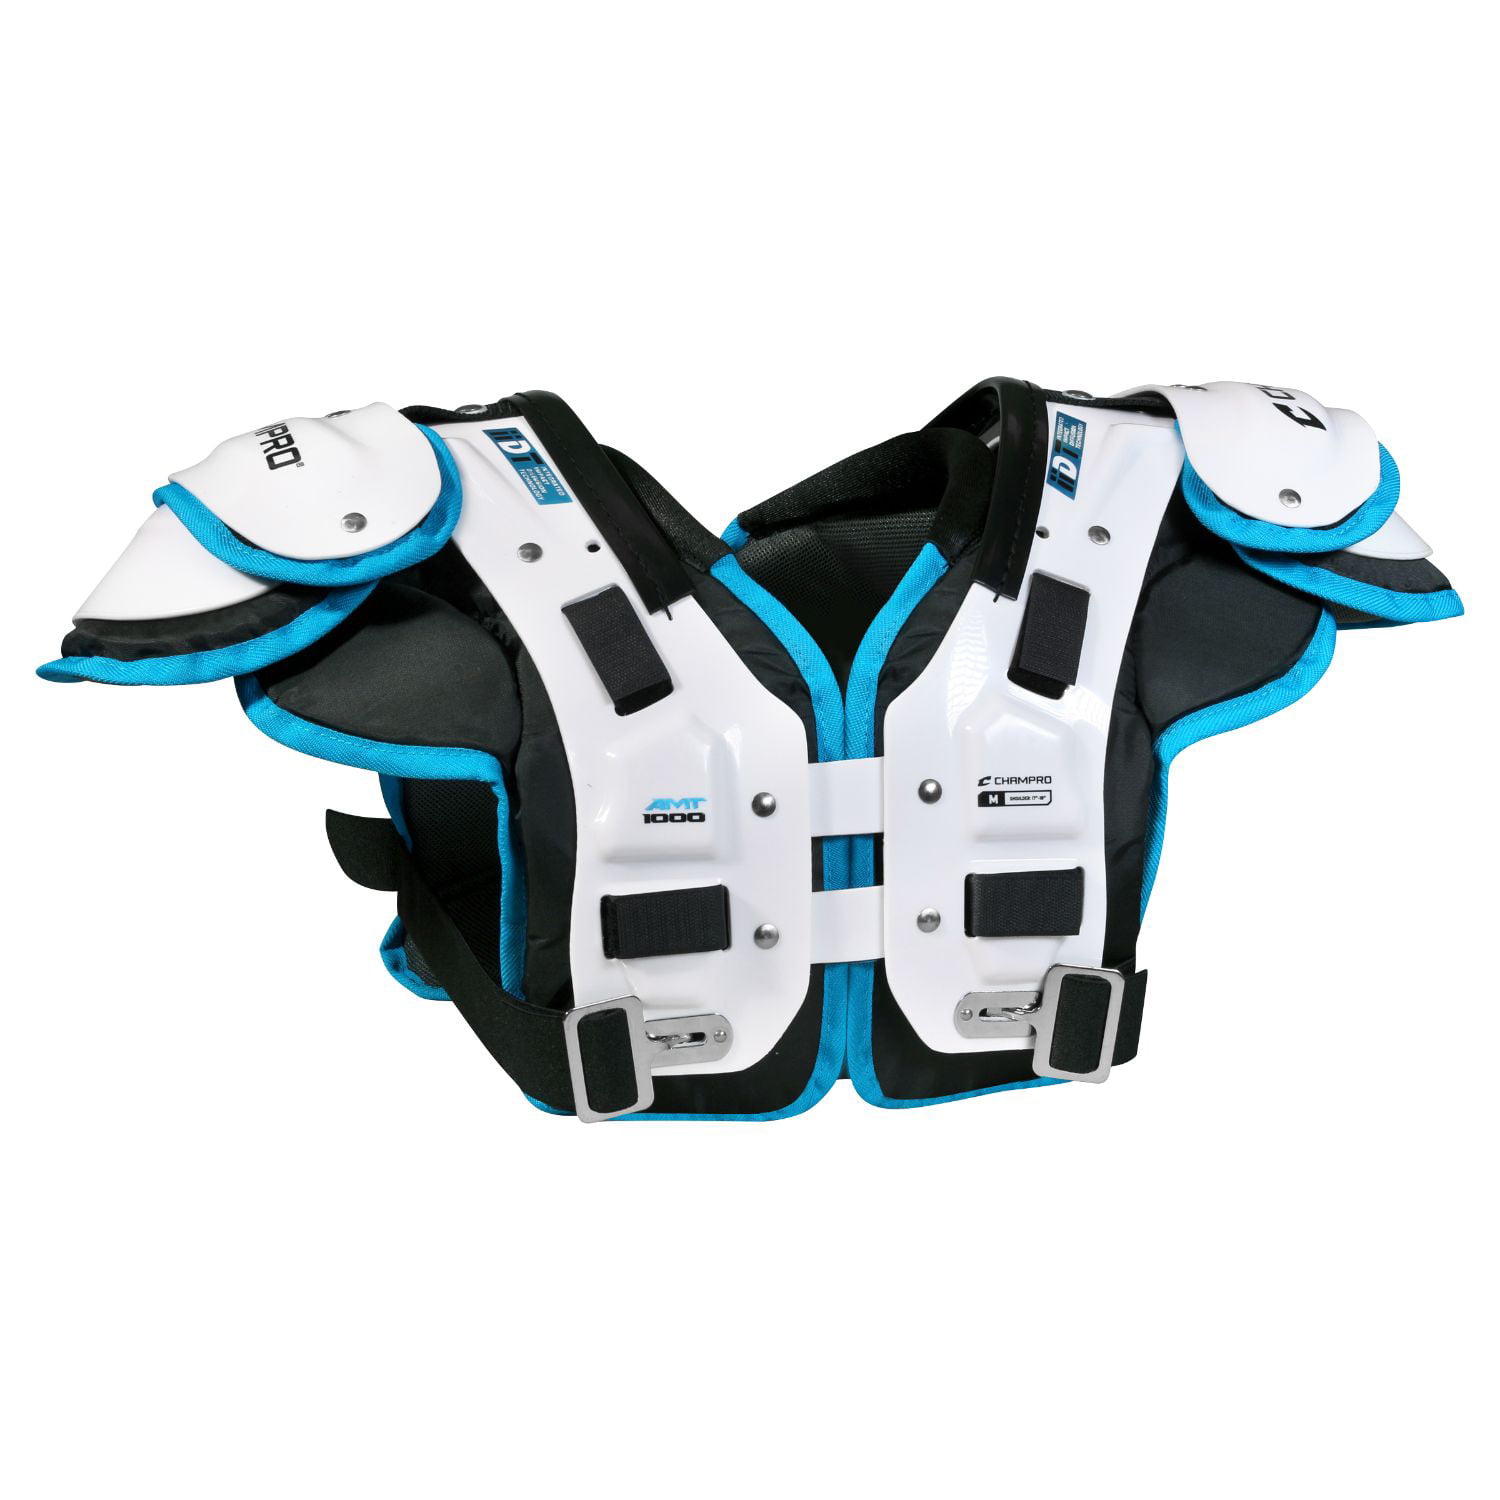 Large Champro AMT-1000 Shoulder Pad Football Equipment Gear with Clavicle Pads 